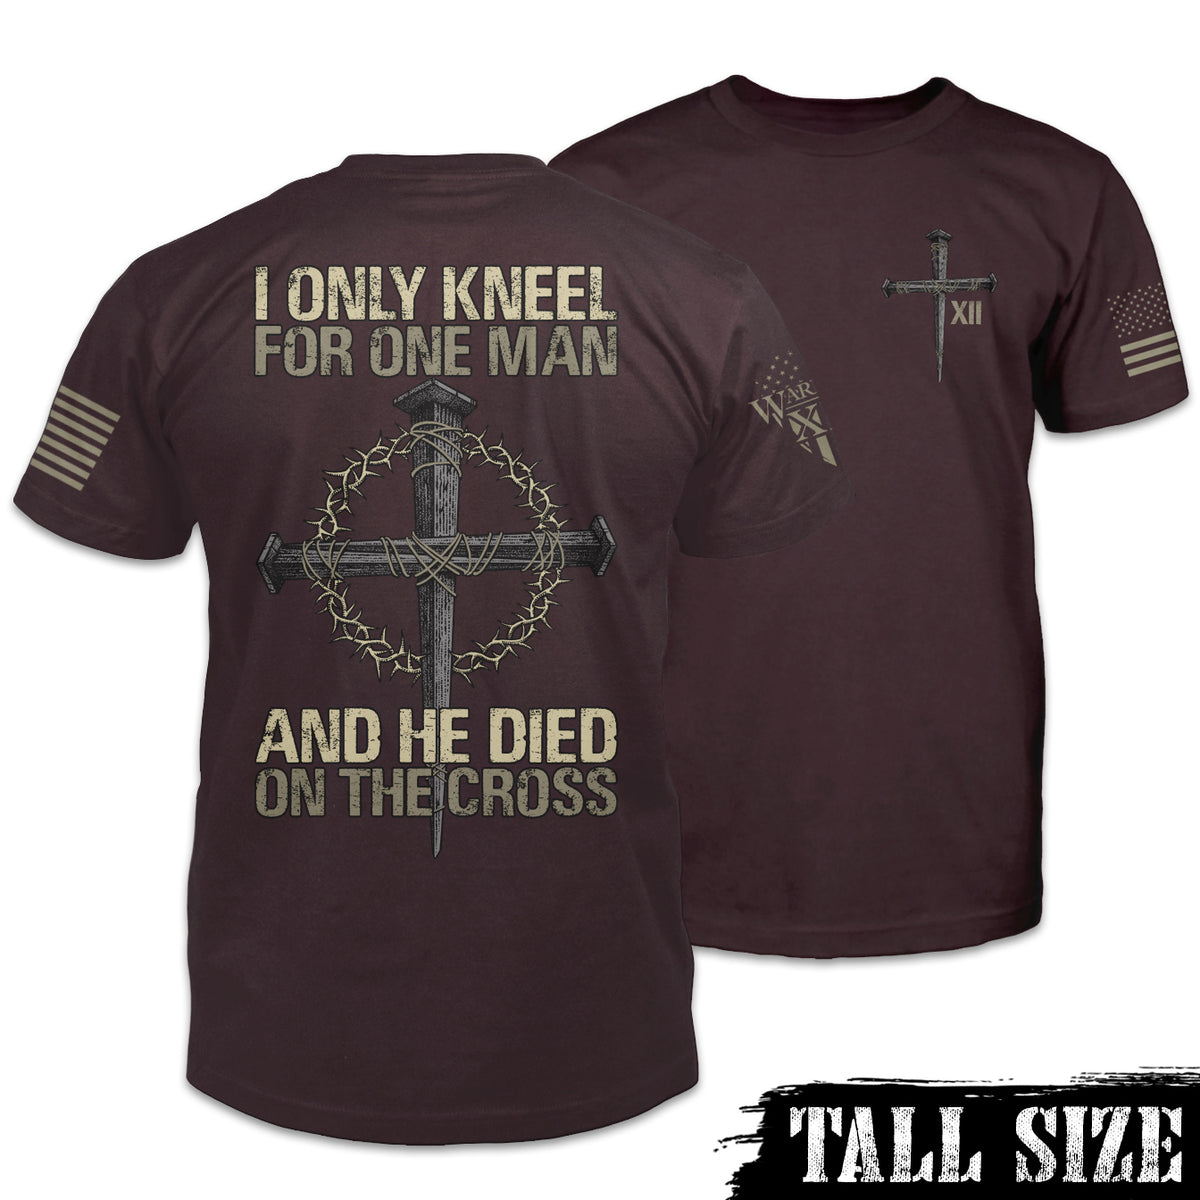 Front & back burgundy tall size shirt with the words "I only kneel for one man, and he died on the cross" with a cross printed on the shirt.